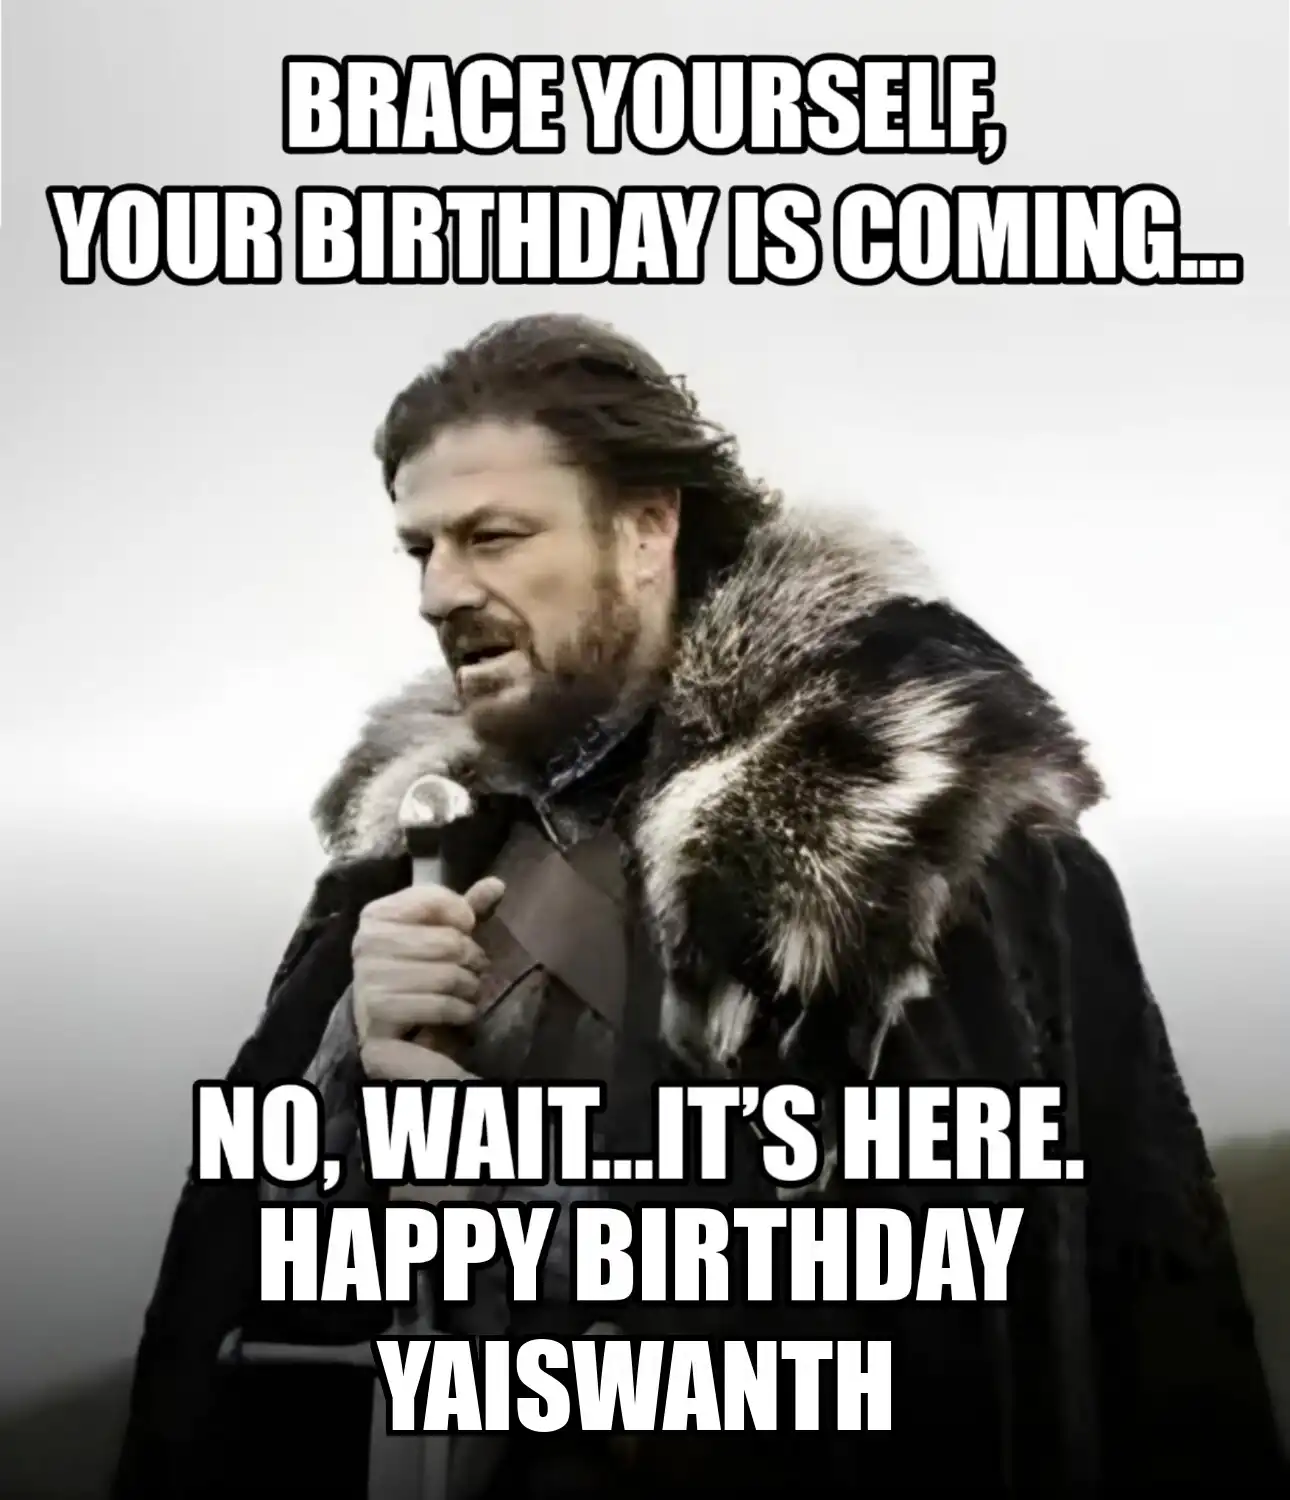 Happy Birthday Yaiswanth Brace Yourself Your Birthday Is Coming Meme